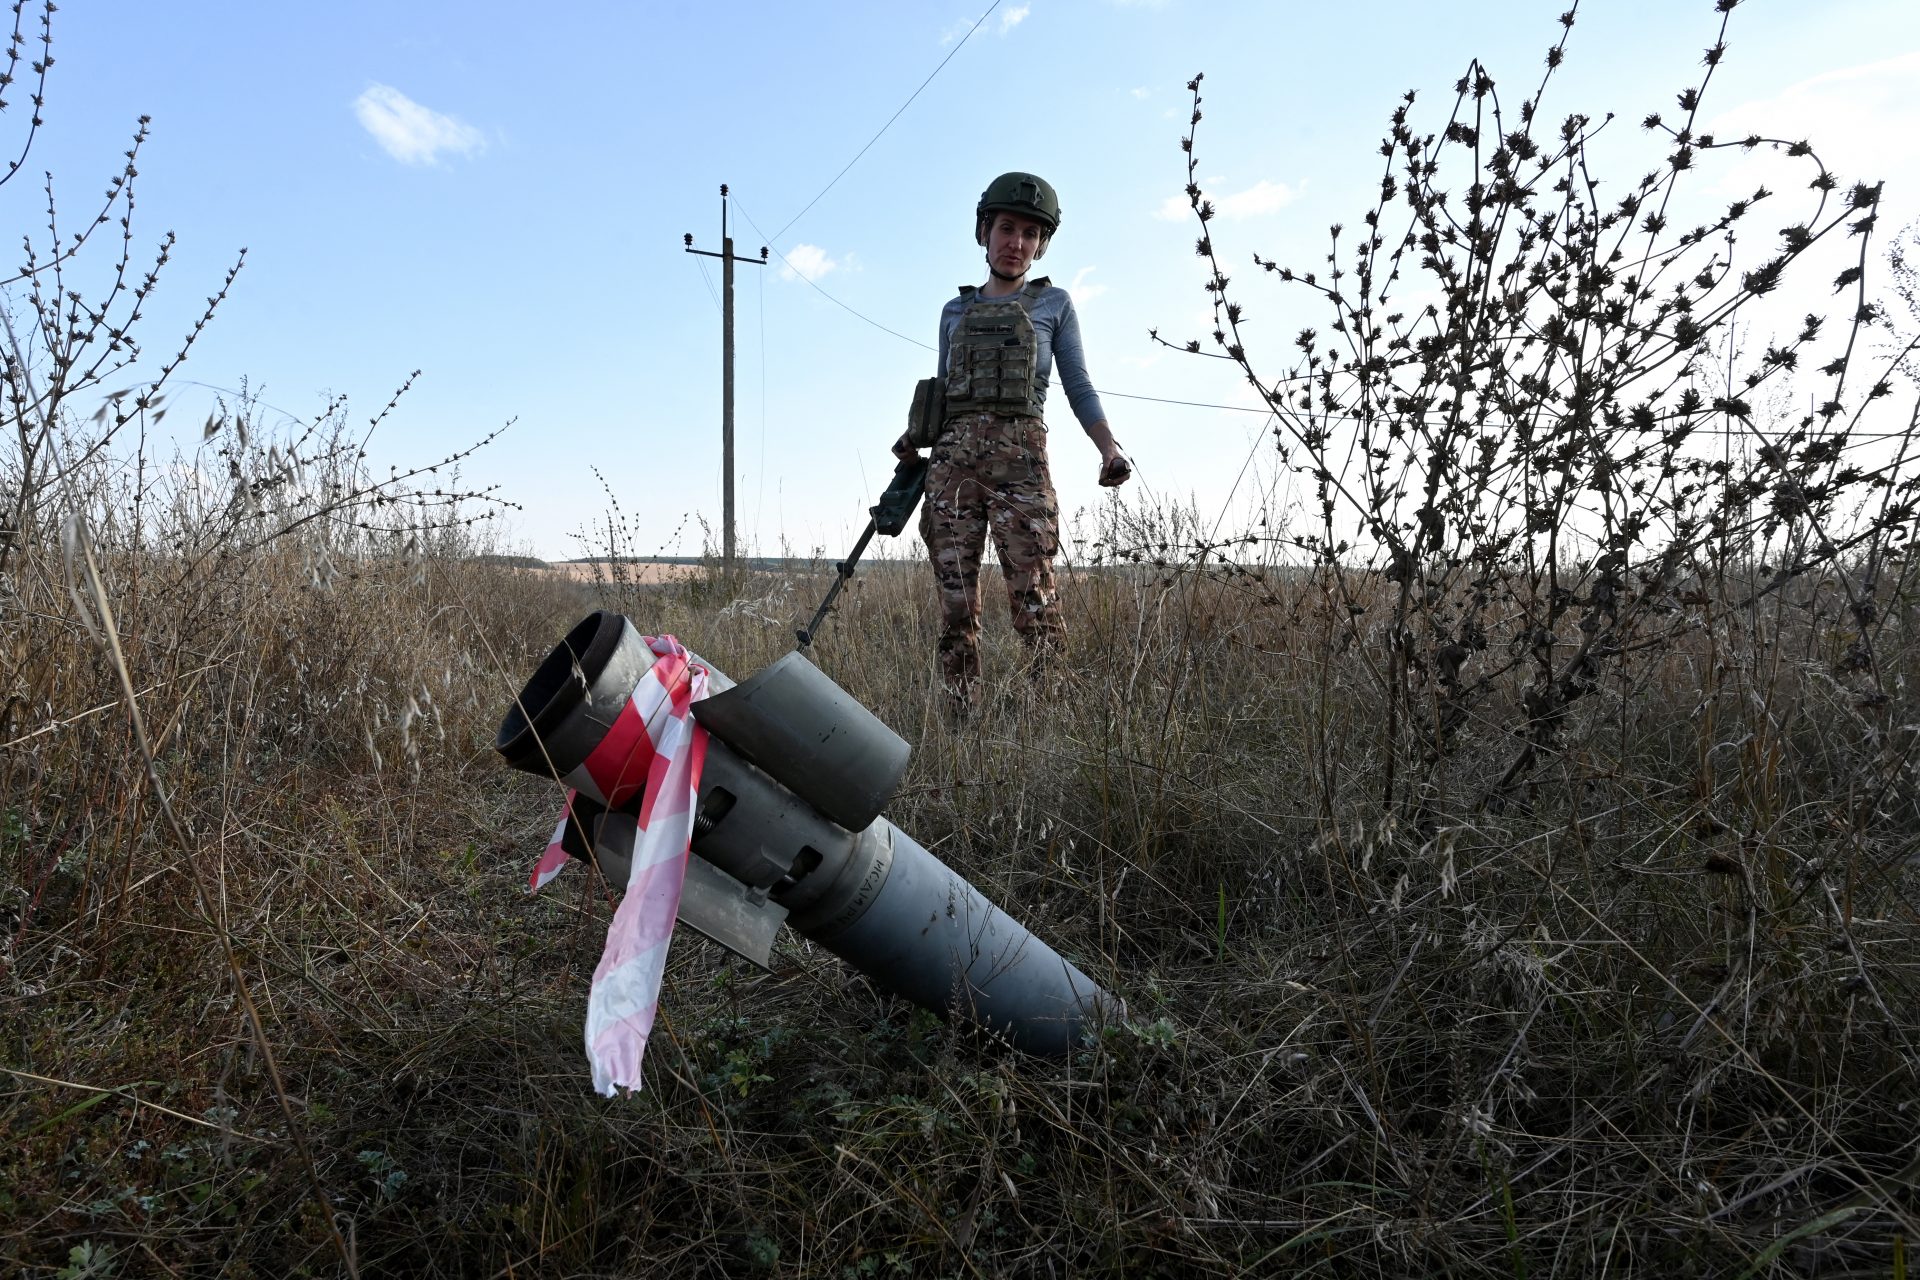 Unexploded ordnance is also an issue